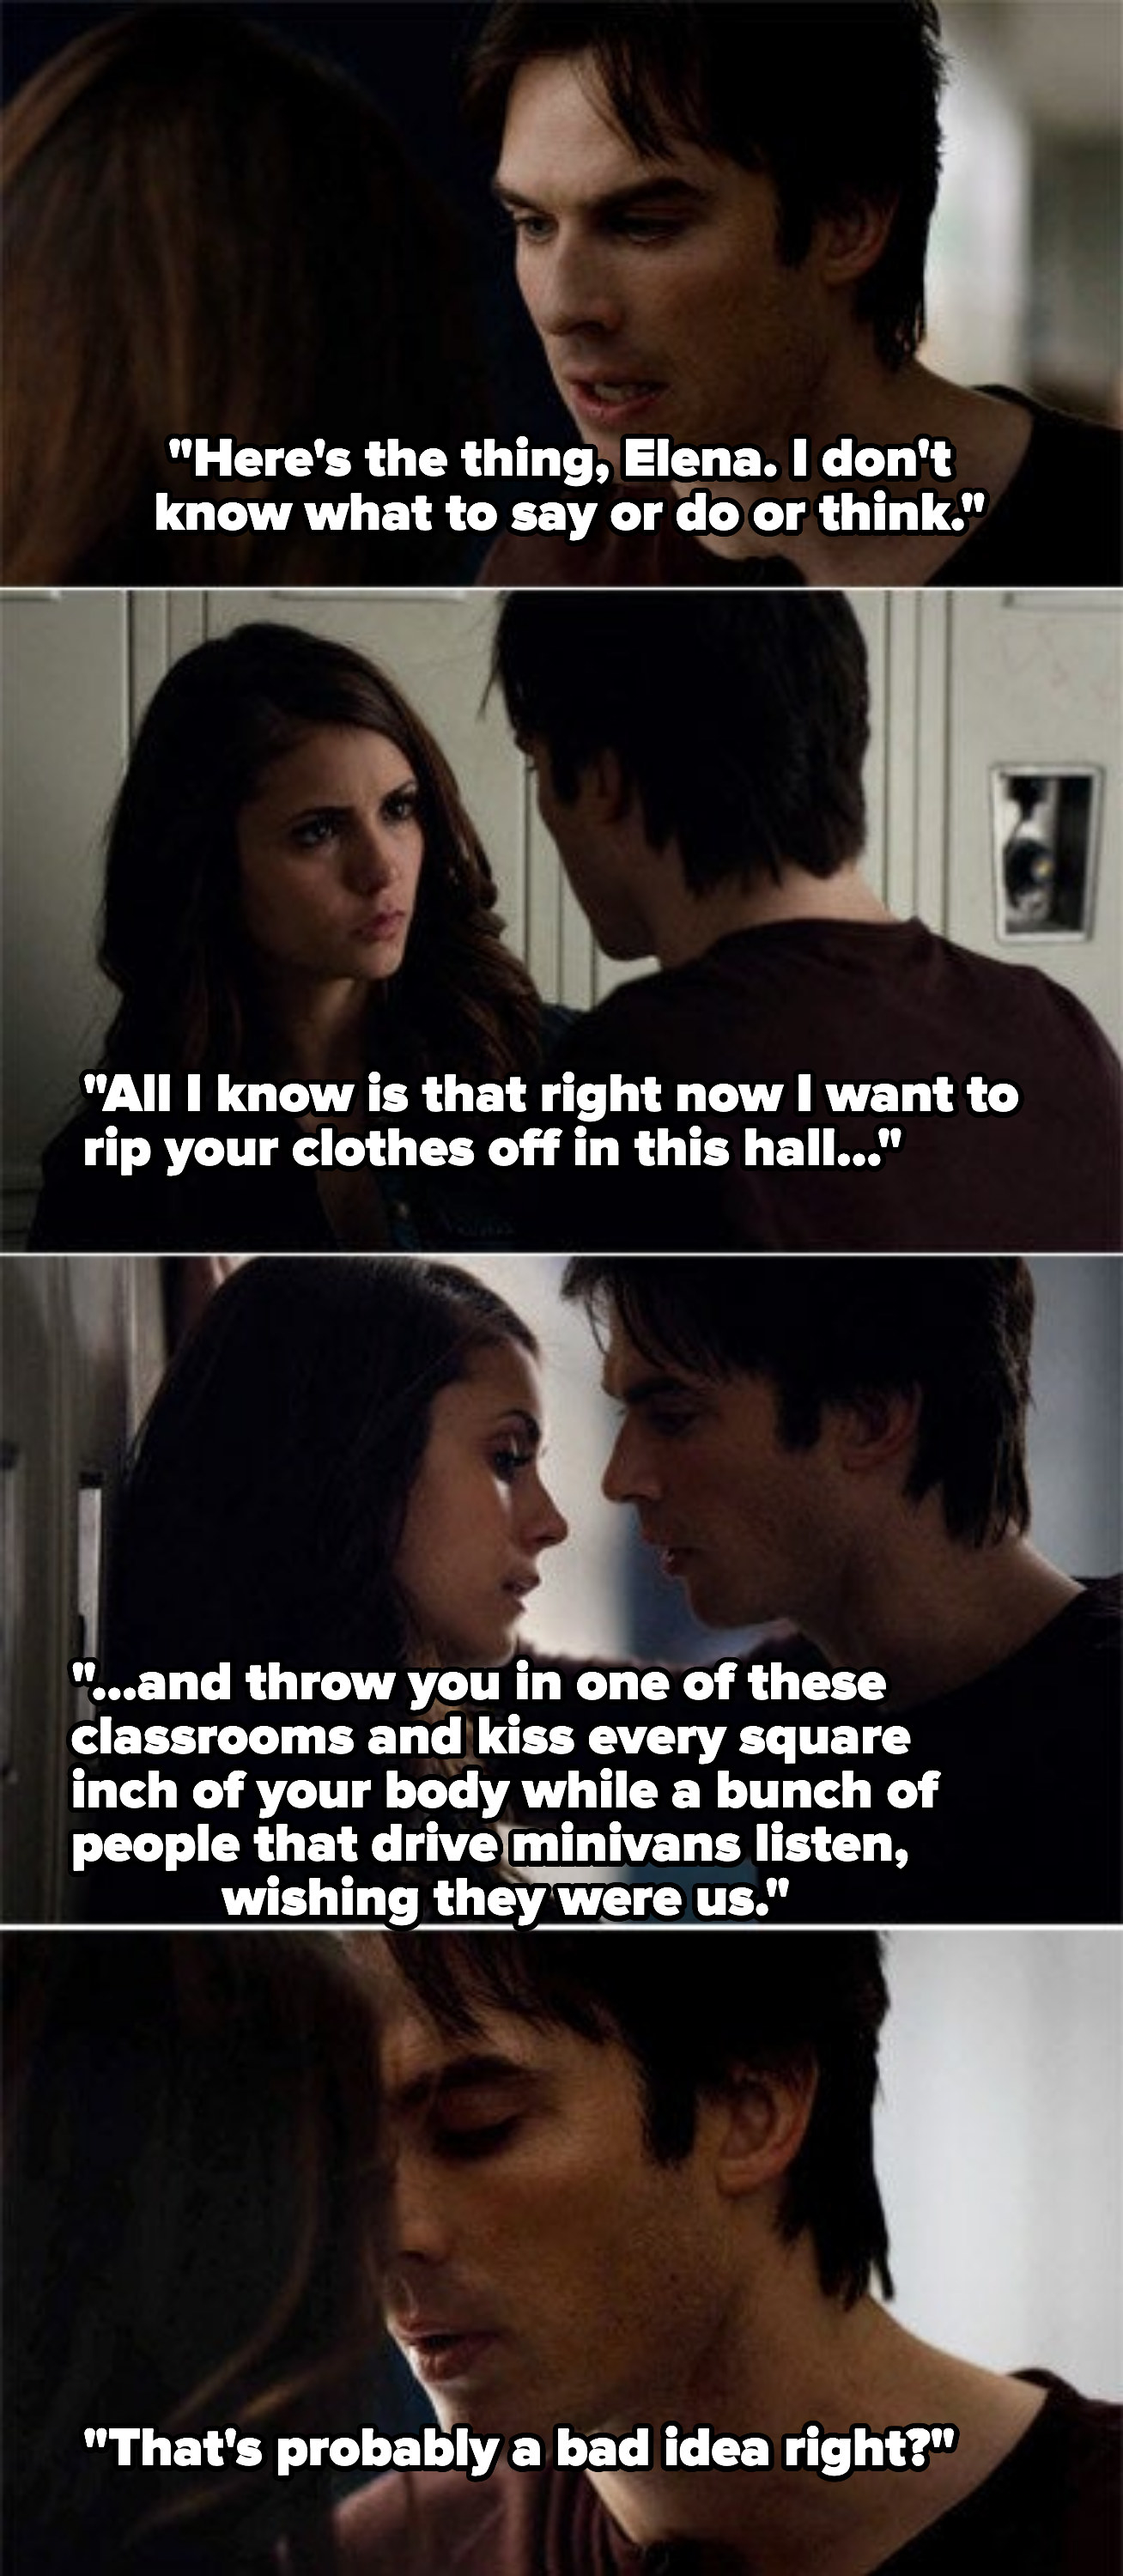 Damon getting close to Elena and telling her that he wants to rip off her clothes in a nearby classroom